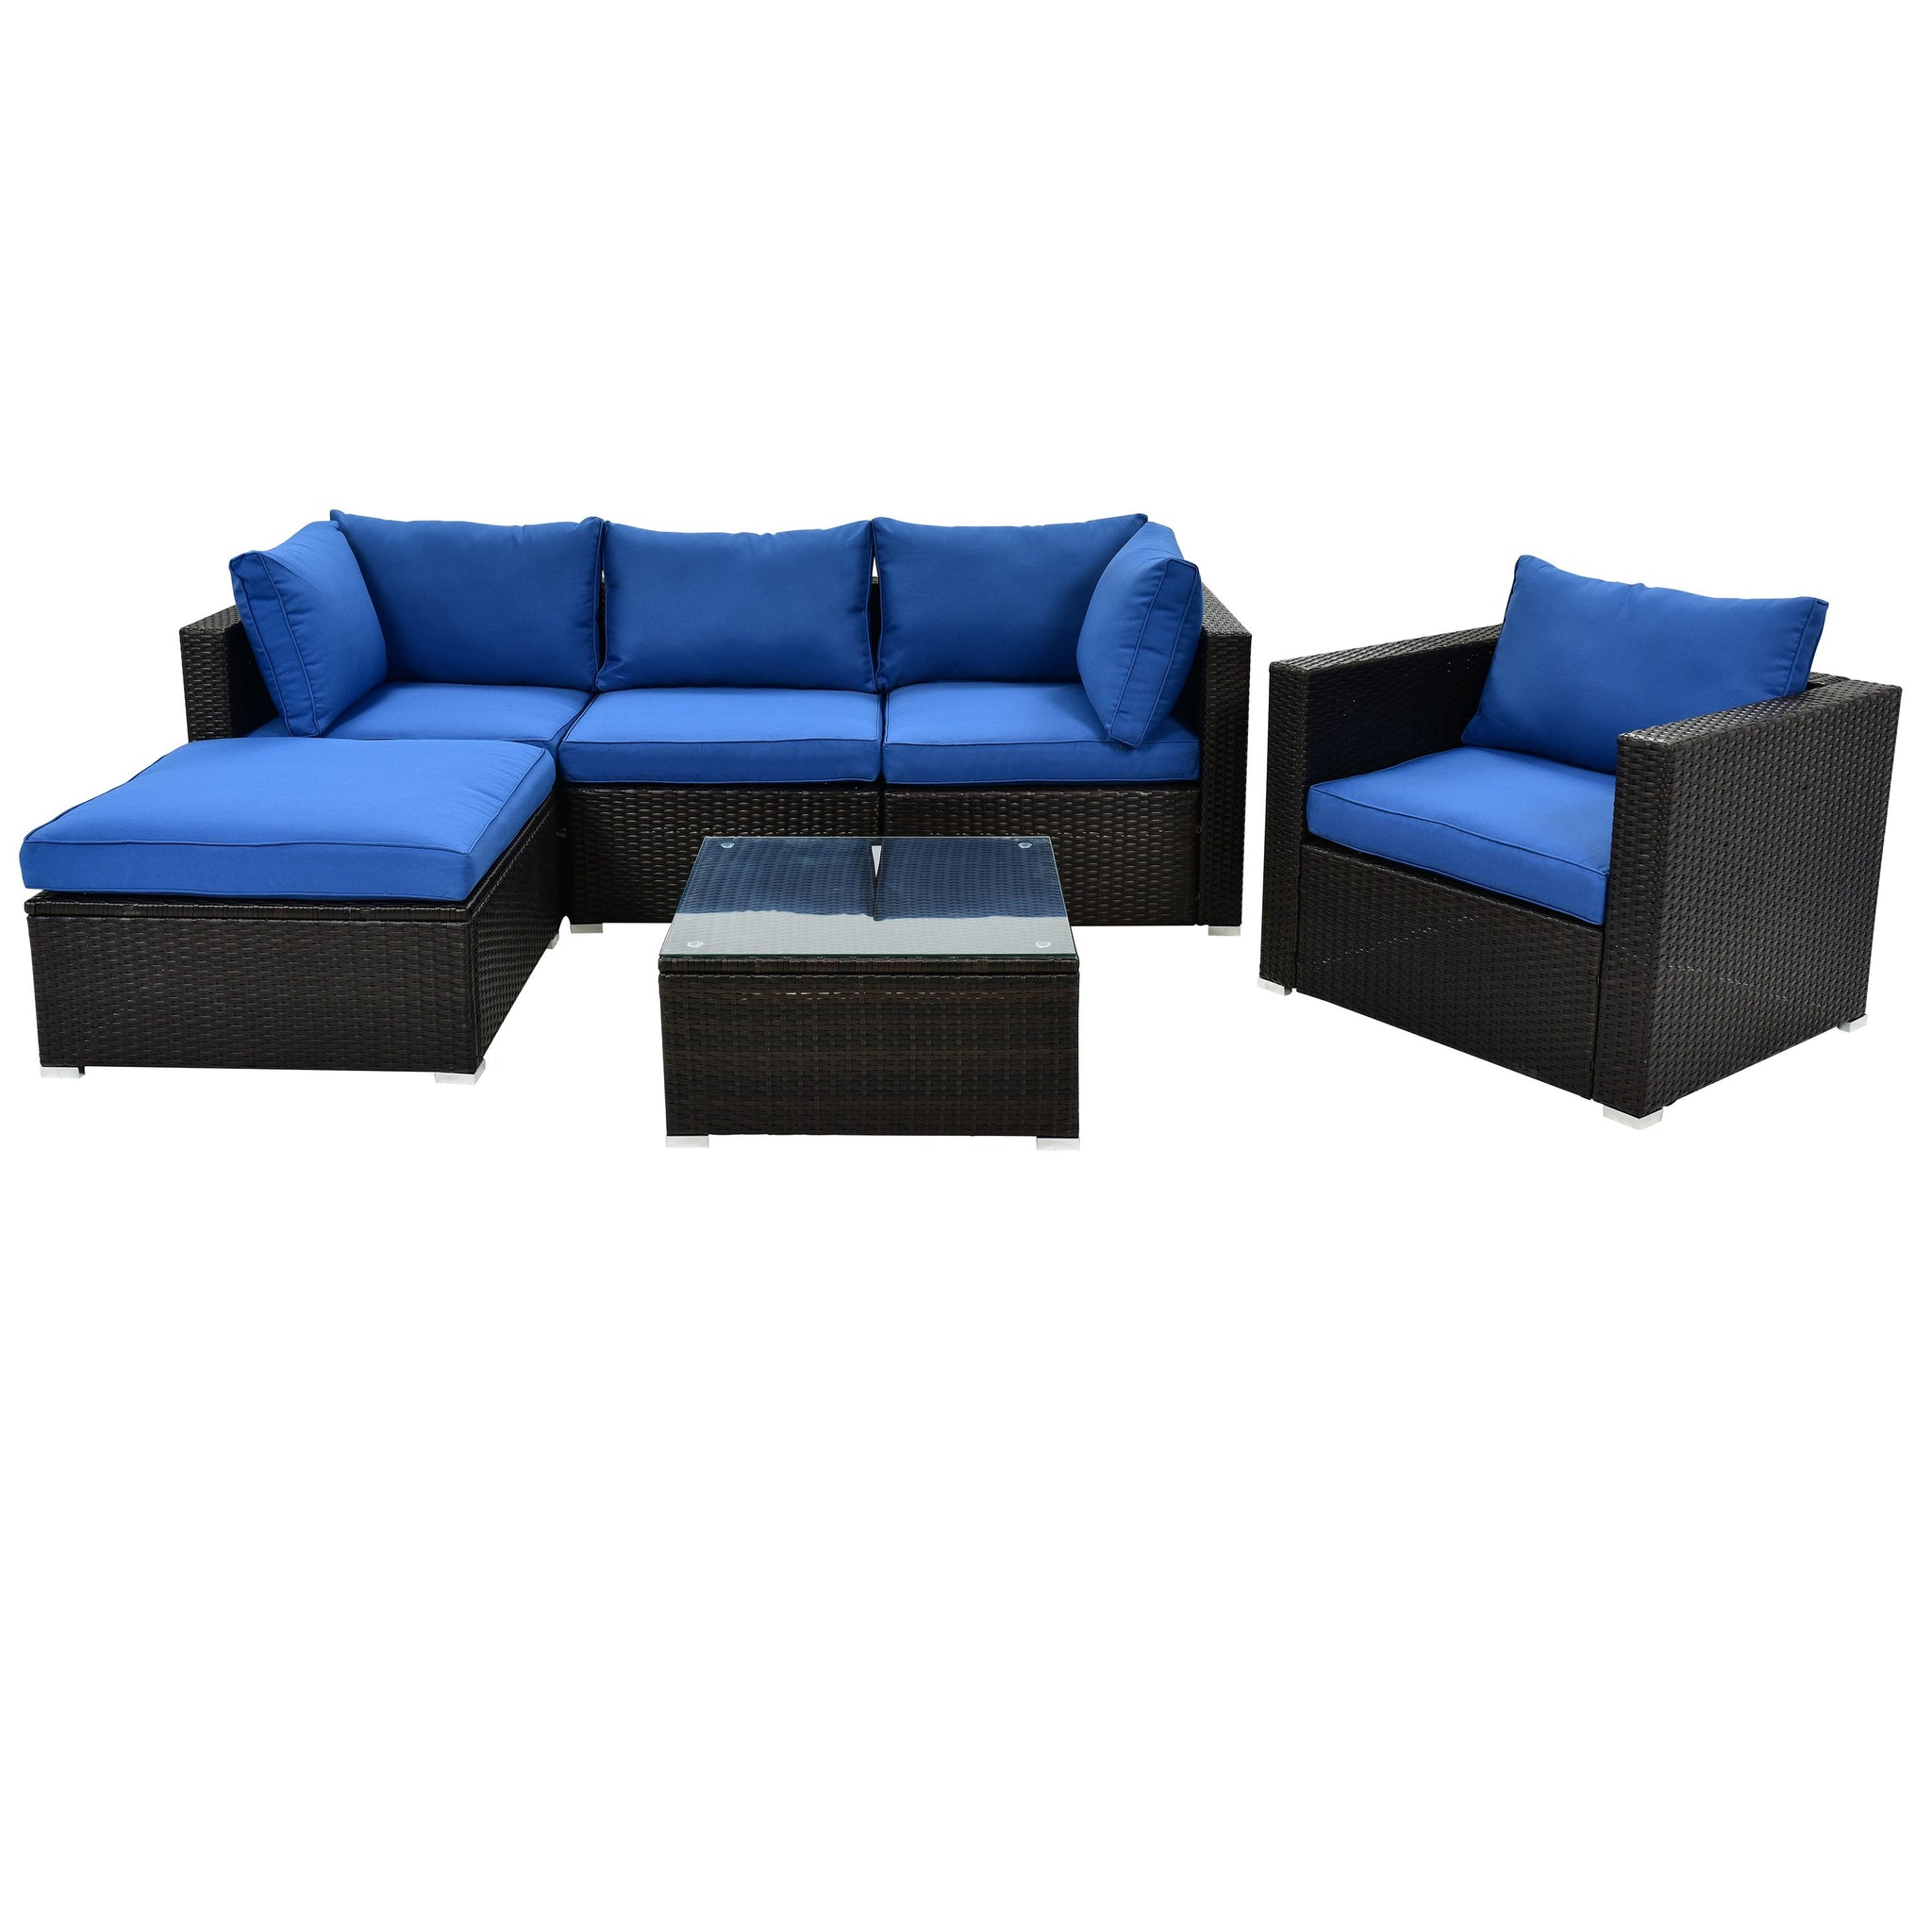 Boyel Living 6-Piece Outdoor Patio Sectional PE Wicker Rattan Sofa Set with Glass Table, Blue Cushion+ Brown Wicker